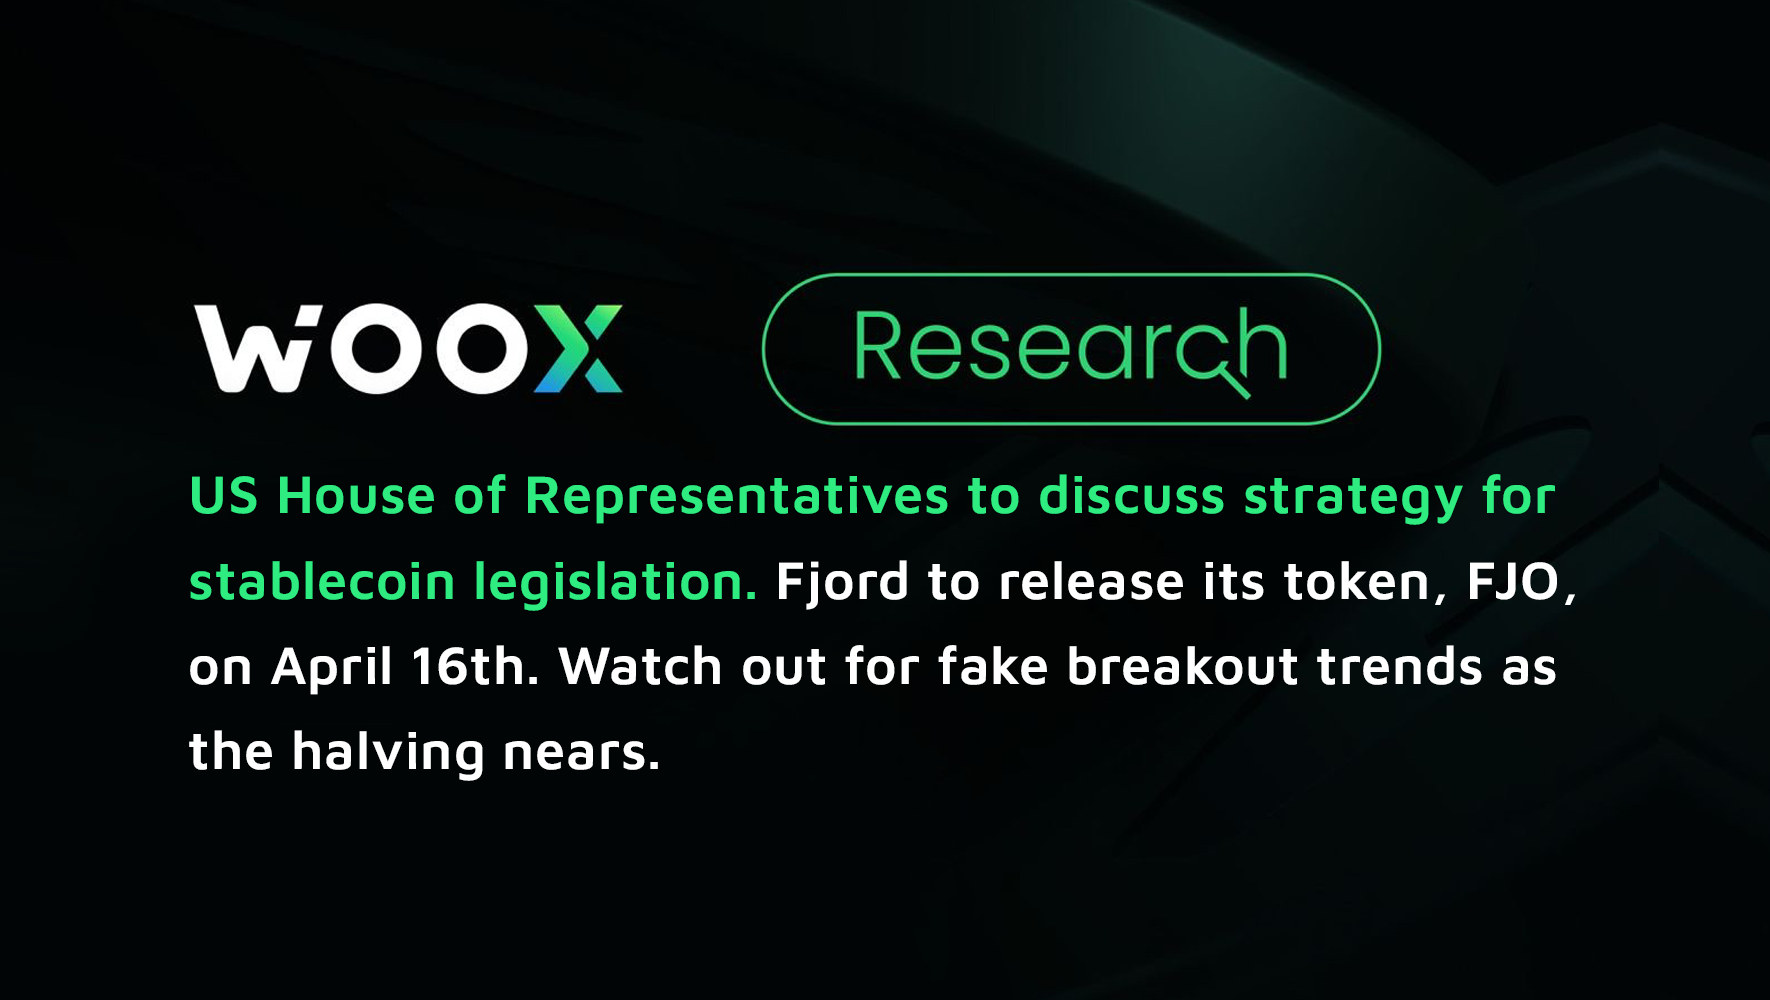 Watch out for fake breakout trends as the halving nears